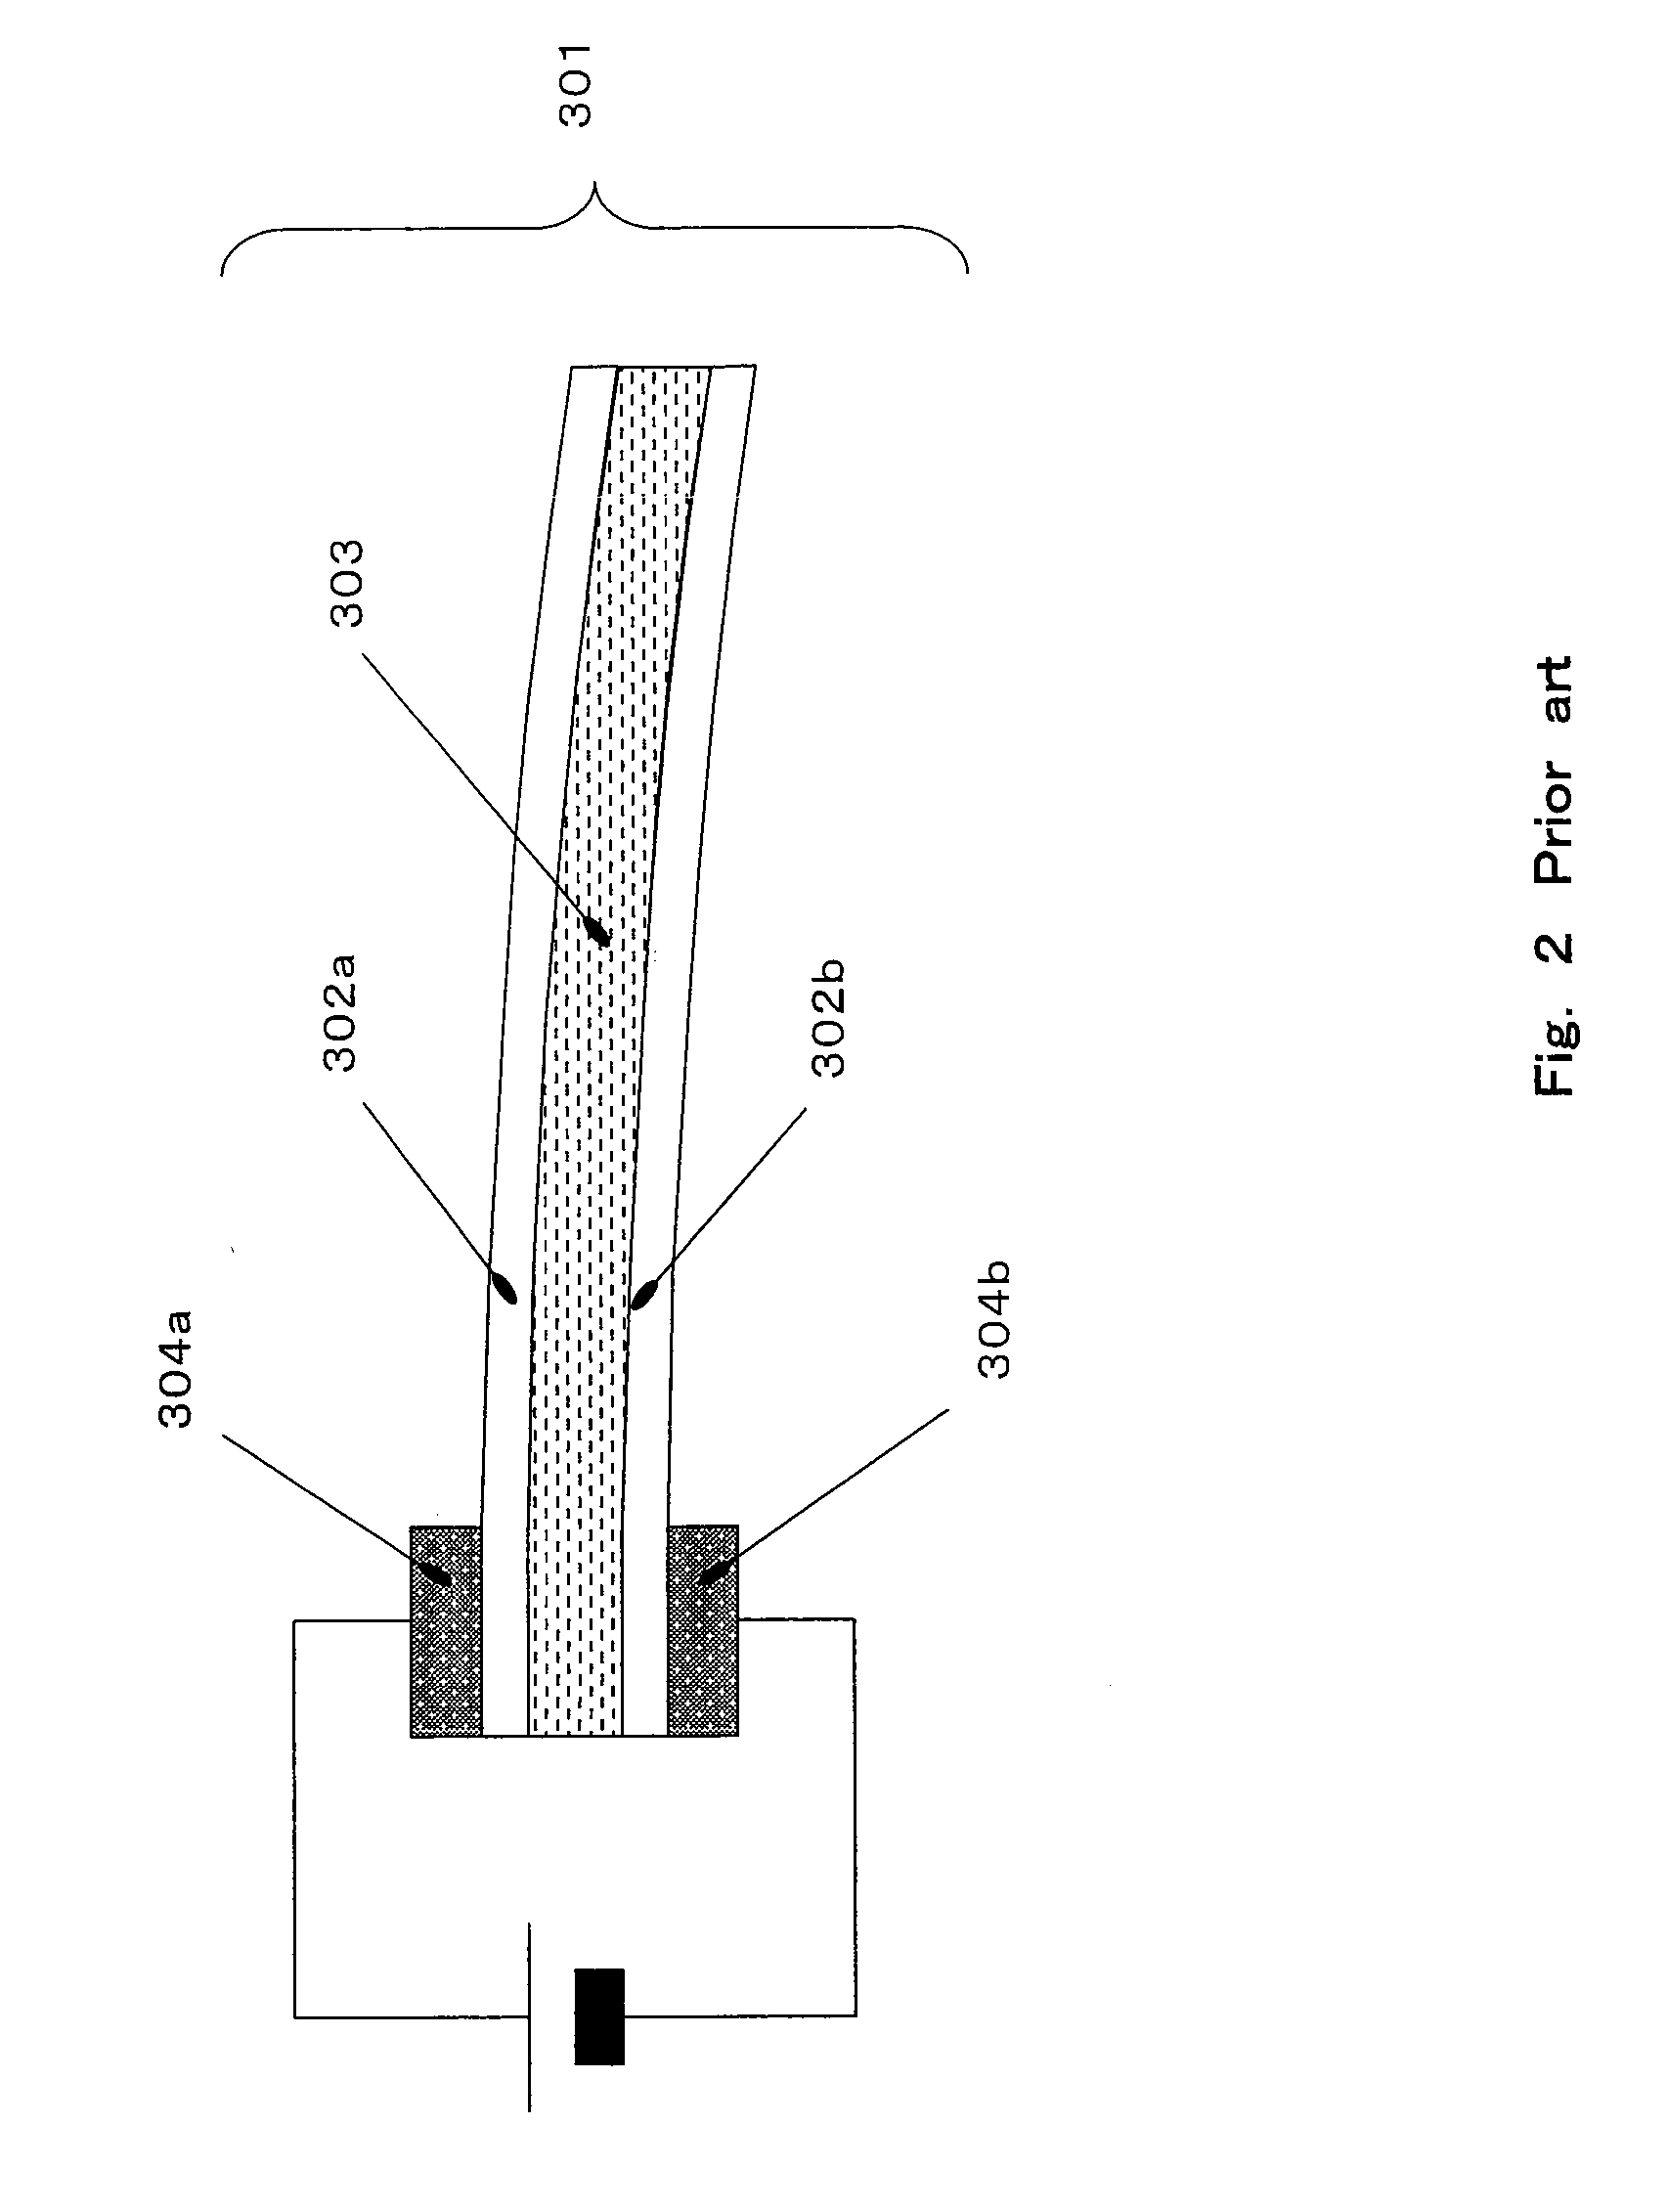 Electrically conductive polymer actuator and method for manufacturing the same